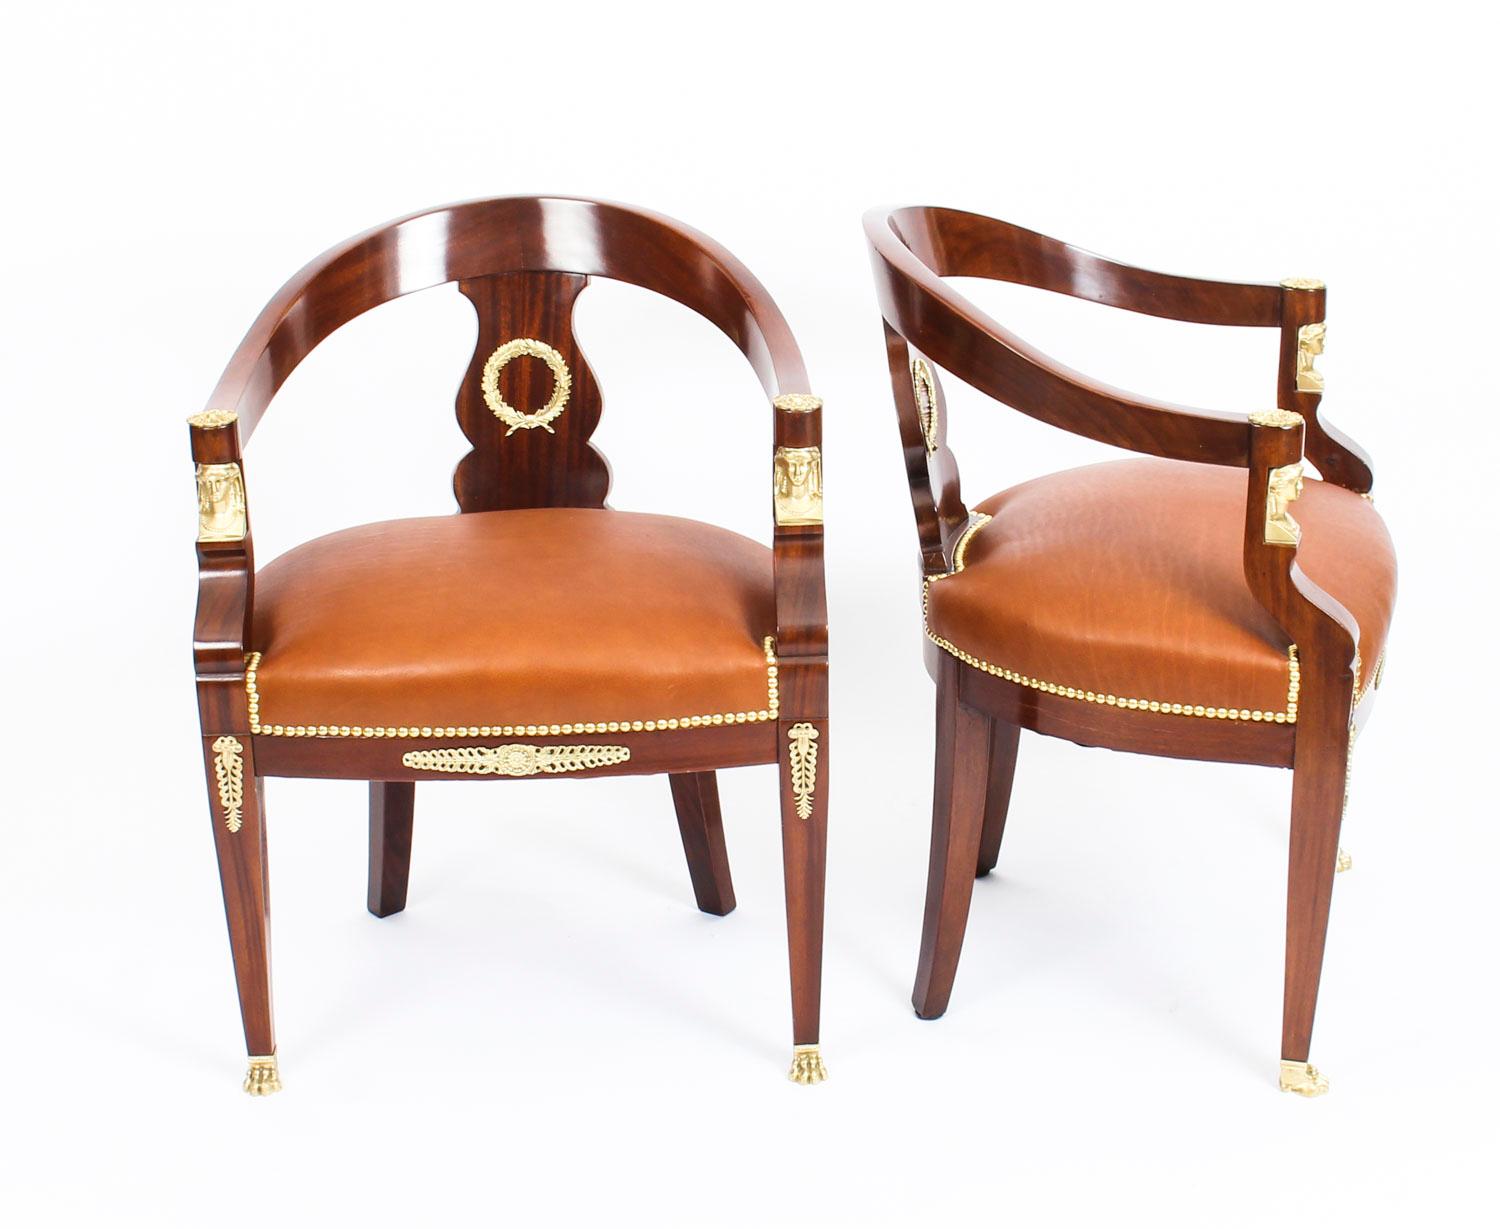 This is a fabulous pair of antique French Second Empire mahogany and ormolu mounted armchairs, circa 1880 in date.
 
The mahogany is beautiful in colour and has been embellished with striking ormolu mounts.
 
There is an ormolu sphinx decorating